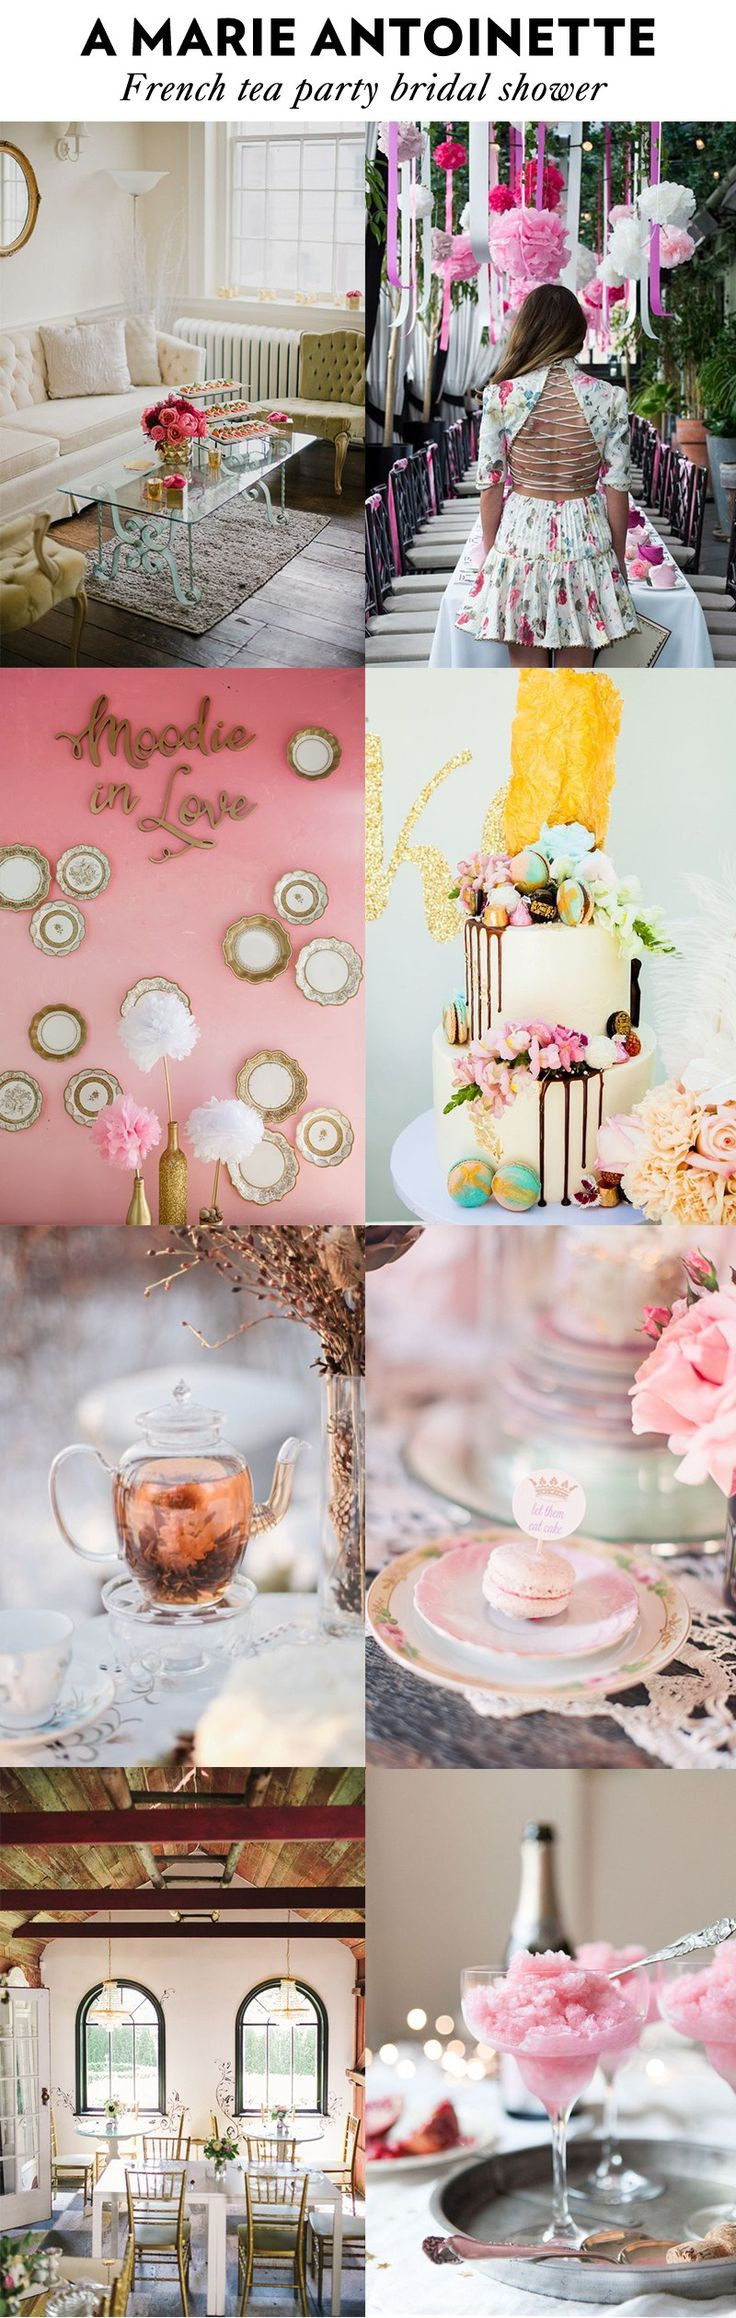 French Tea Party Ideas
 25 Best Ideas about Chic Bridal Showers on Pinterest